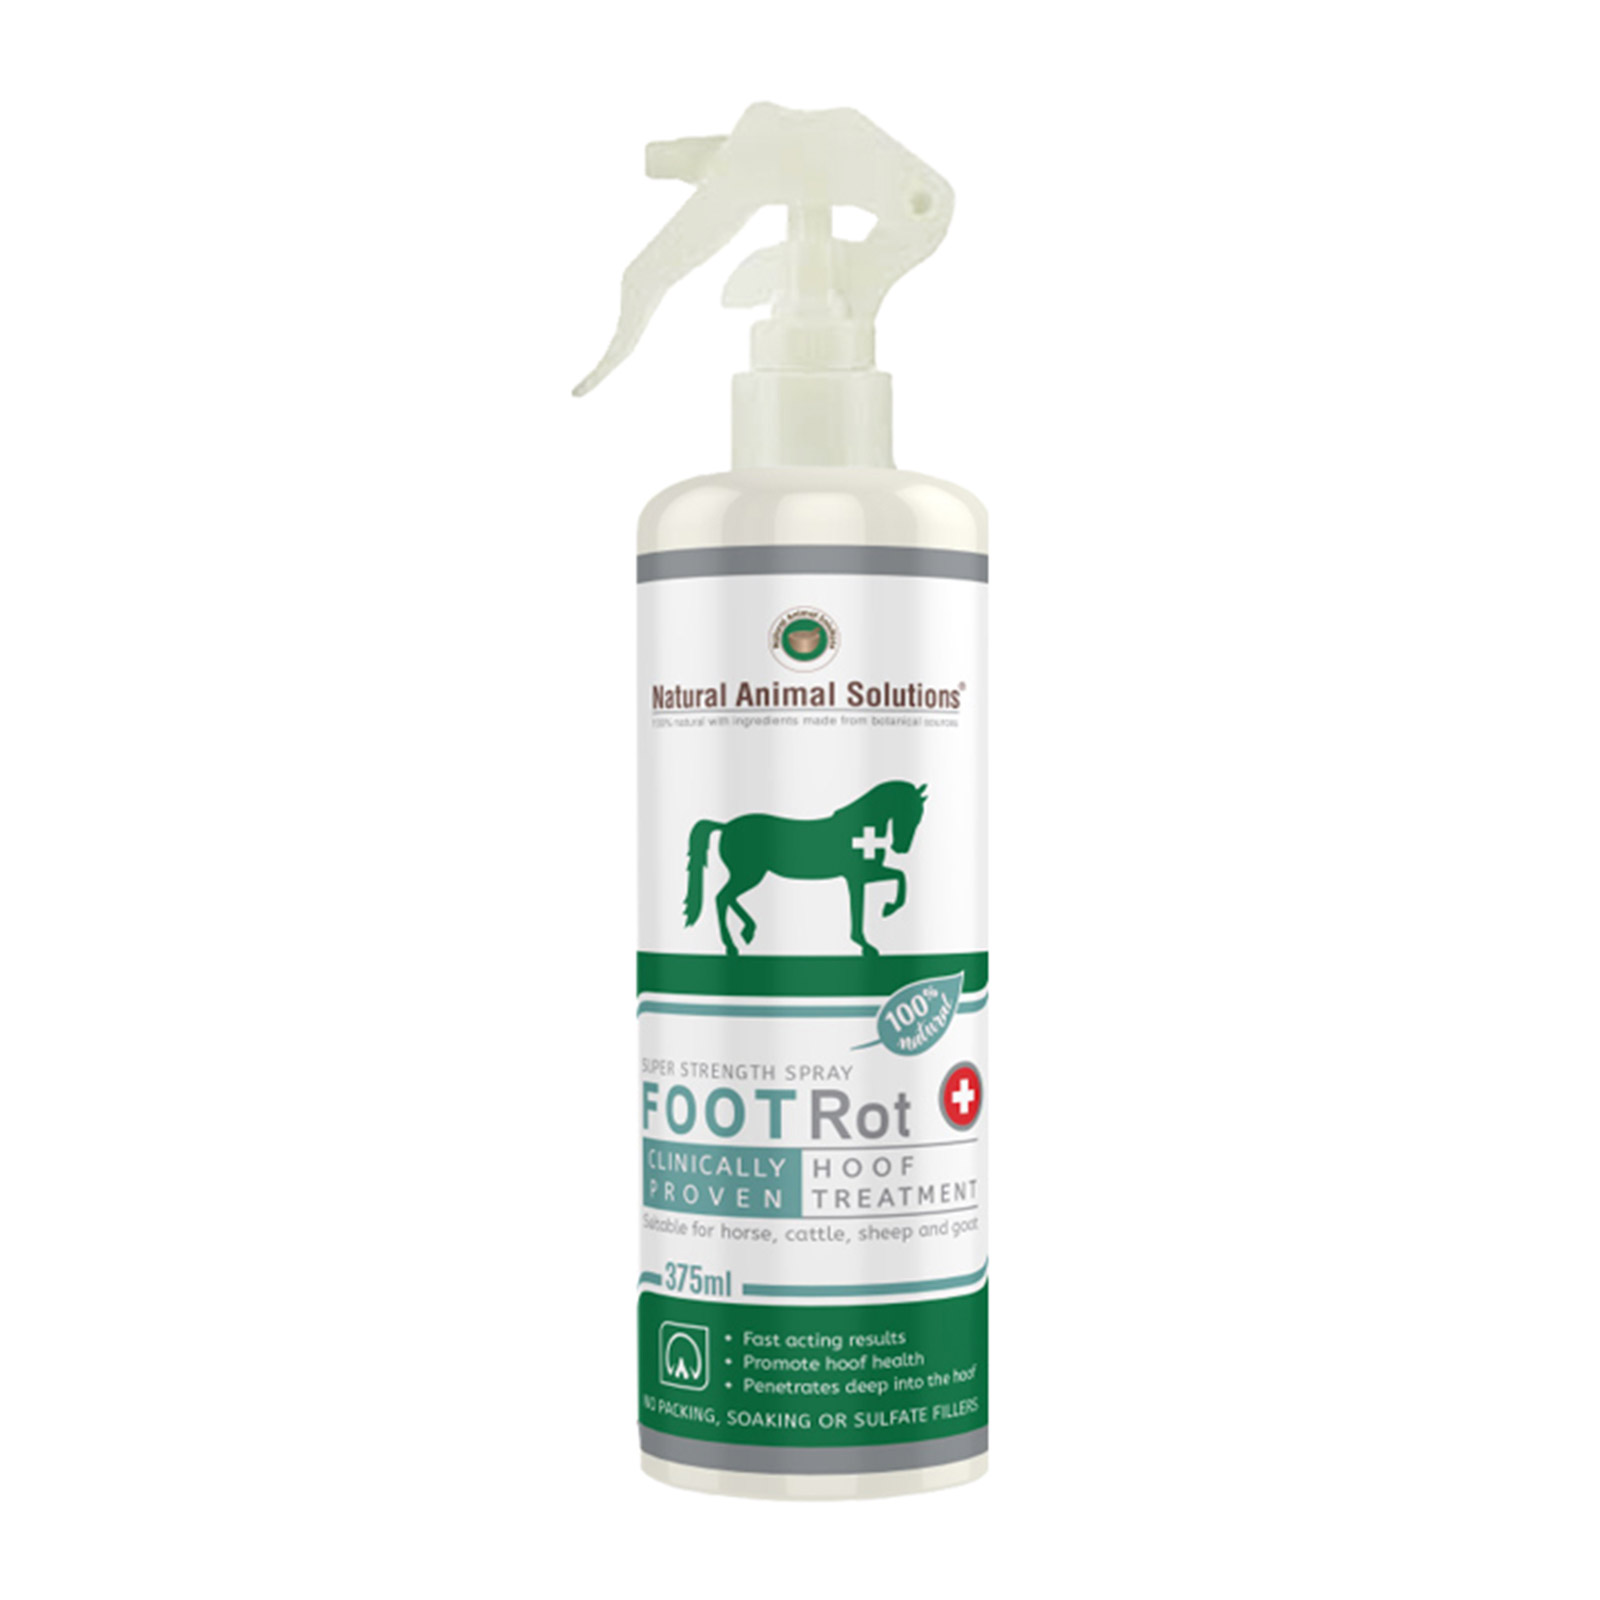 Natural Animal Solutions (NAS) Footrot Hoof Treatment Spray for Horse